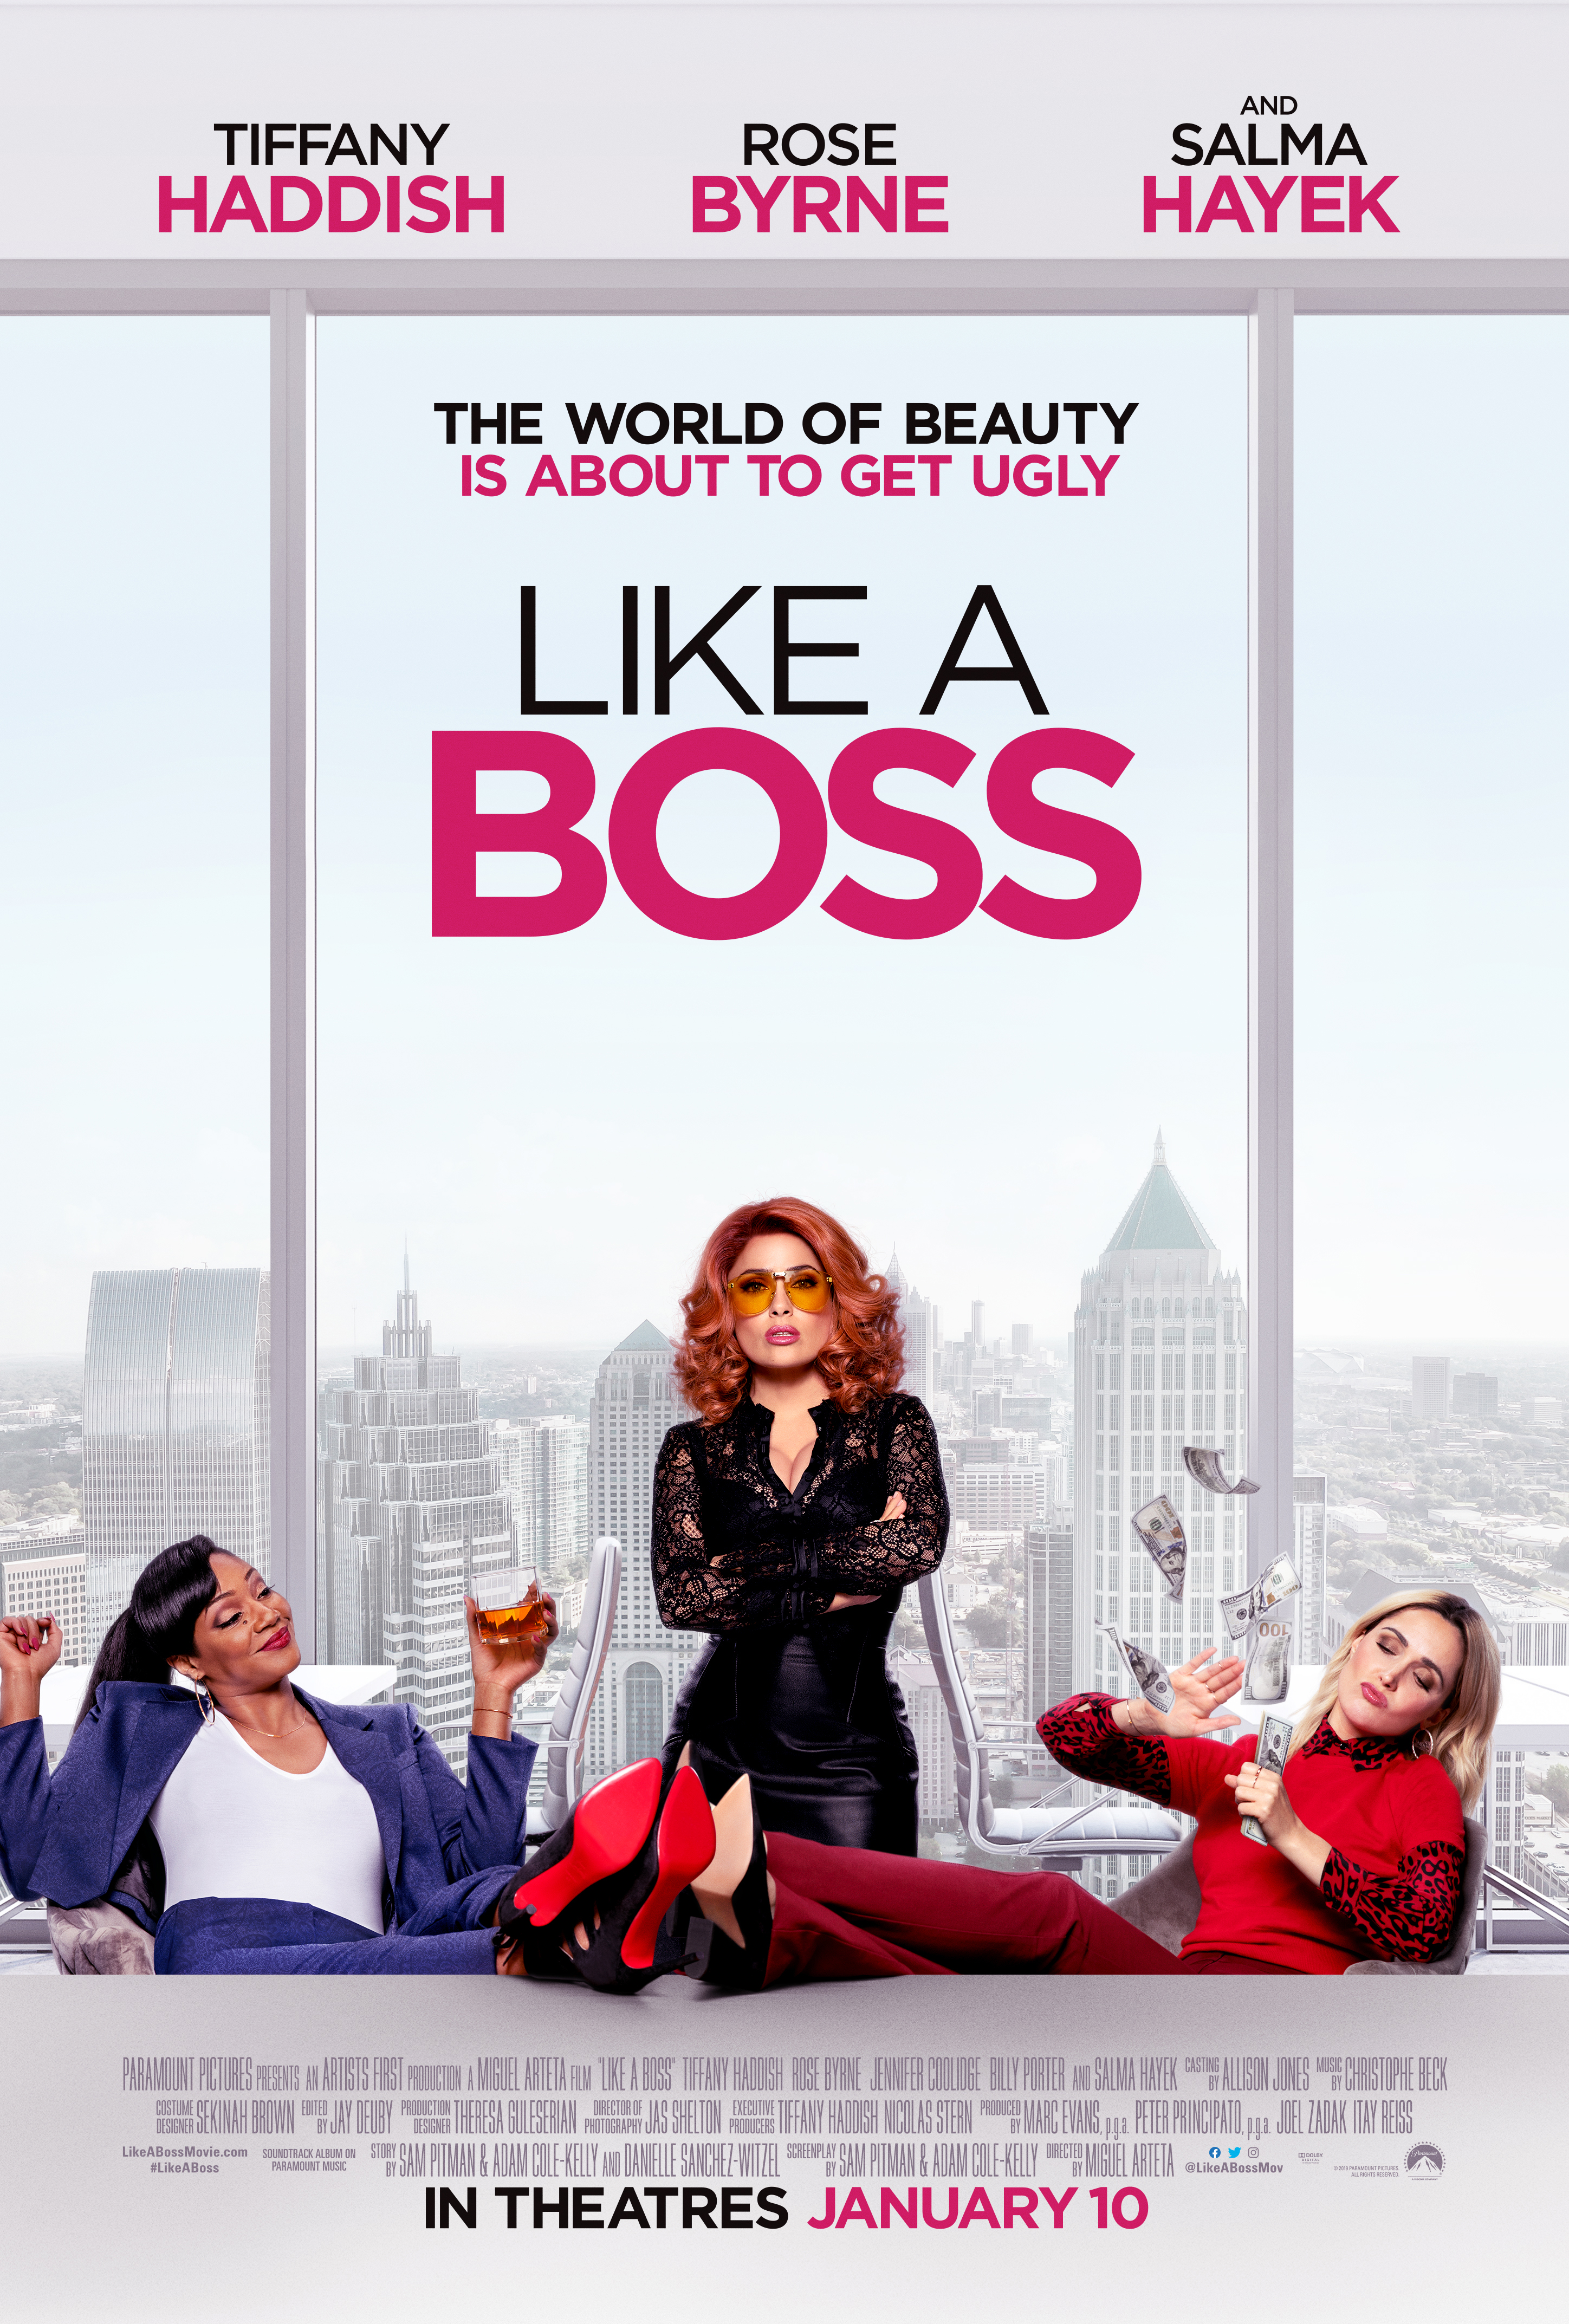 Like A Boss poster and still